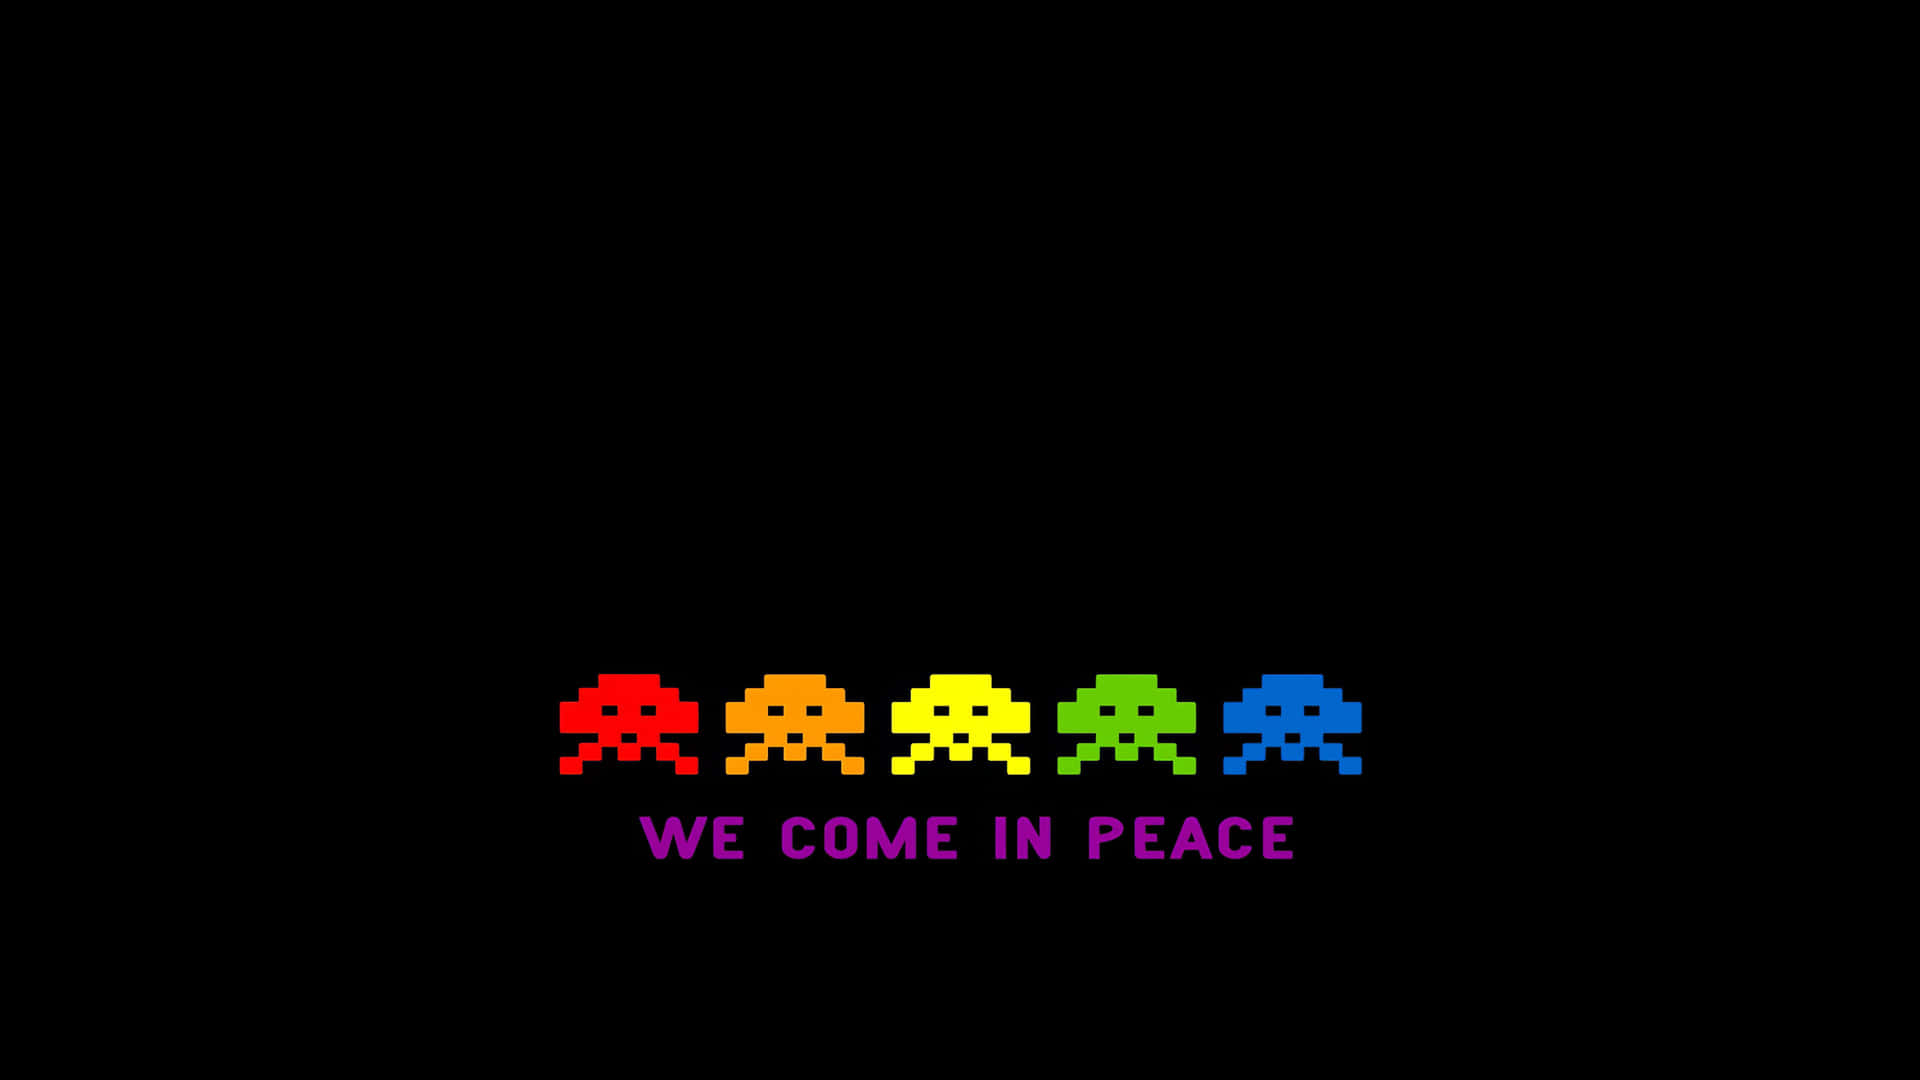 Retro Game Space Invaders Wallpaper